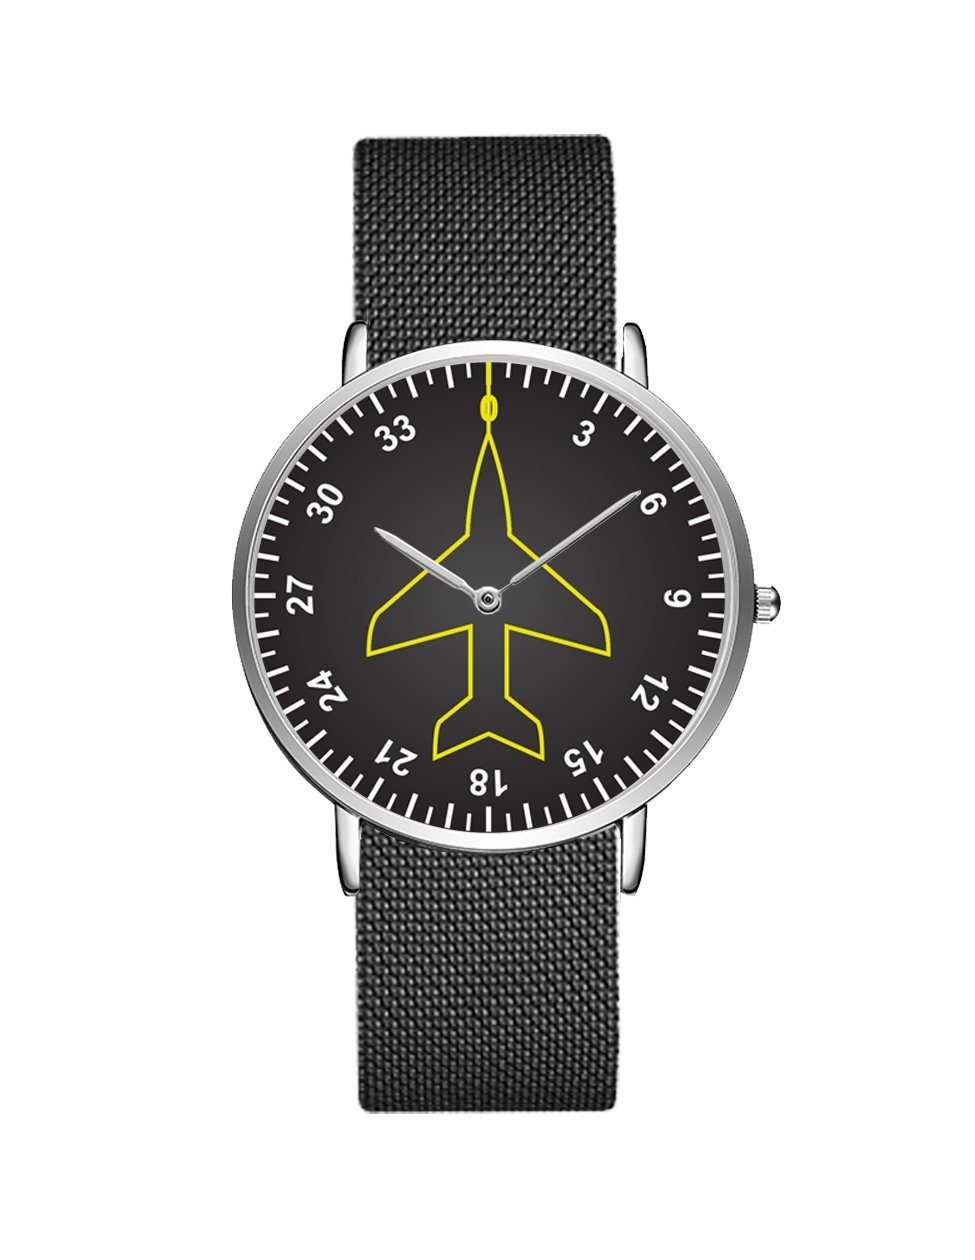 Airplane Instrument Series (Heading) Stainless Steel Strap Watches Pilot Eyes Store Silver & Black Stainless Steel Strap 